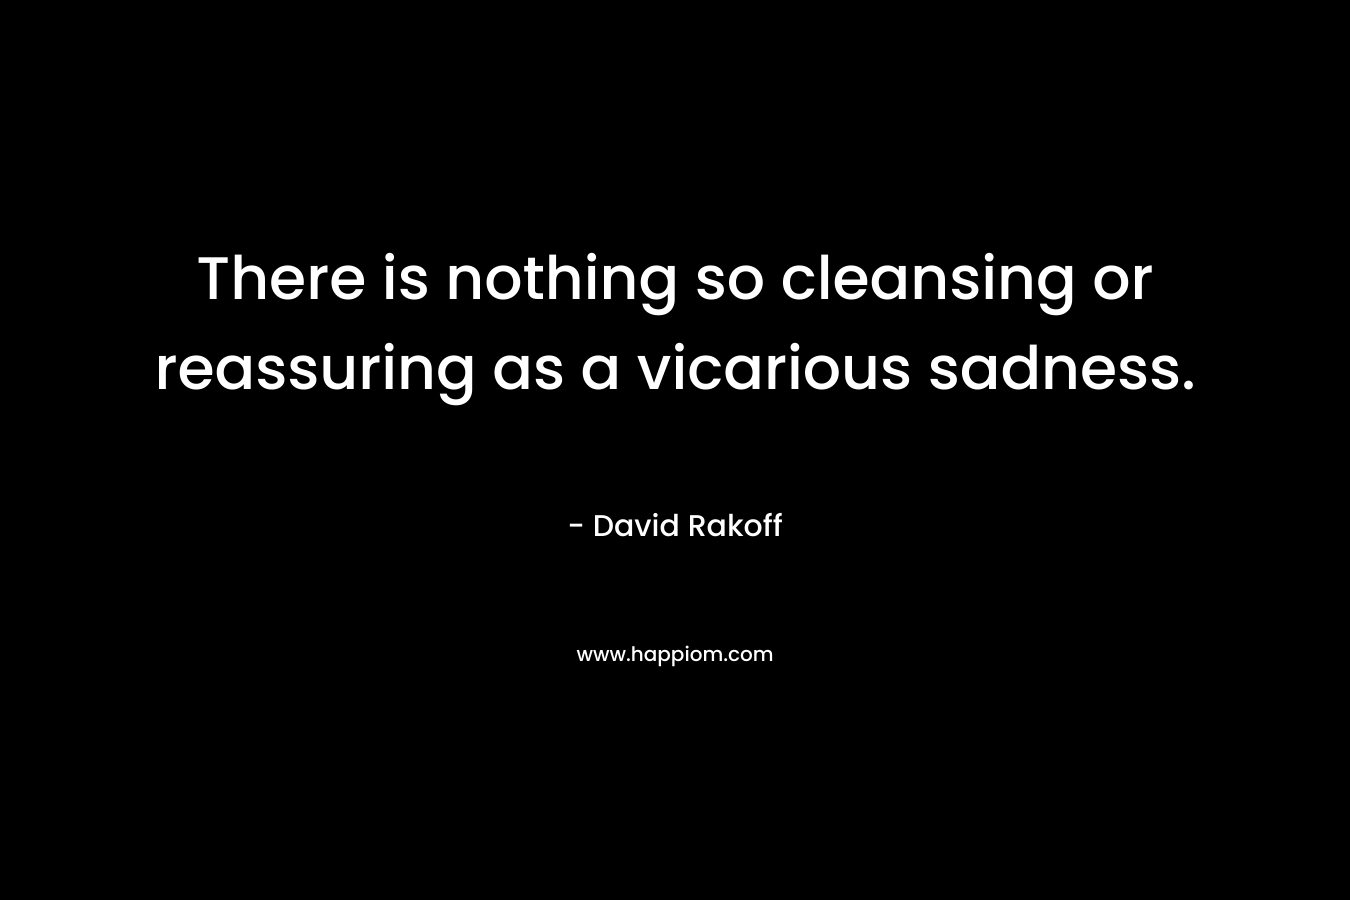 There is nothing so cleansing or reassuring as a vicarious sadness. – David Rakoff